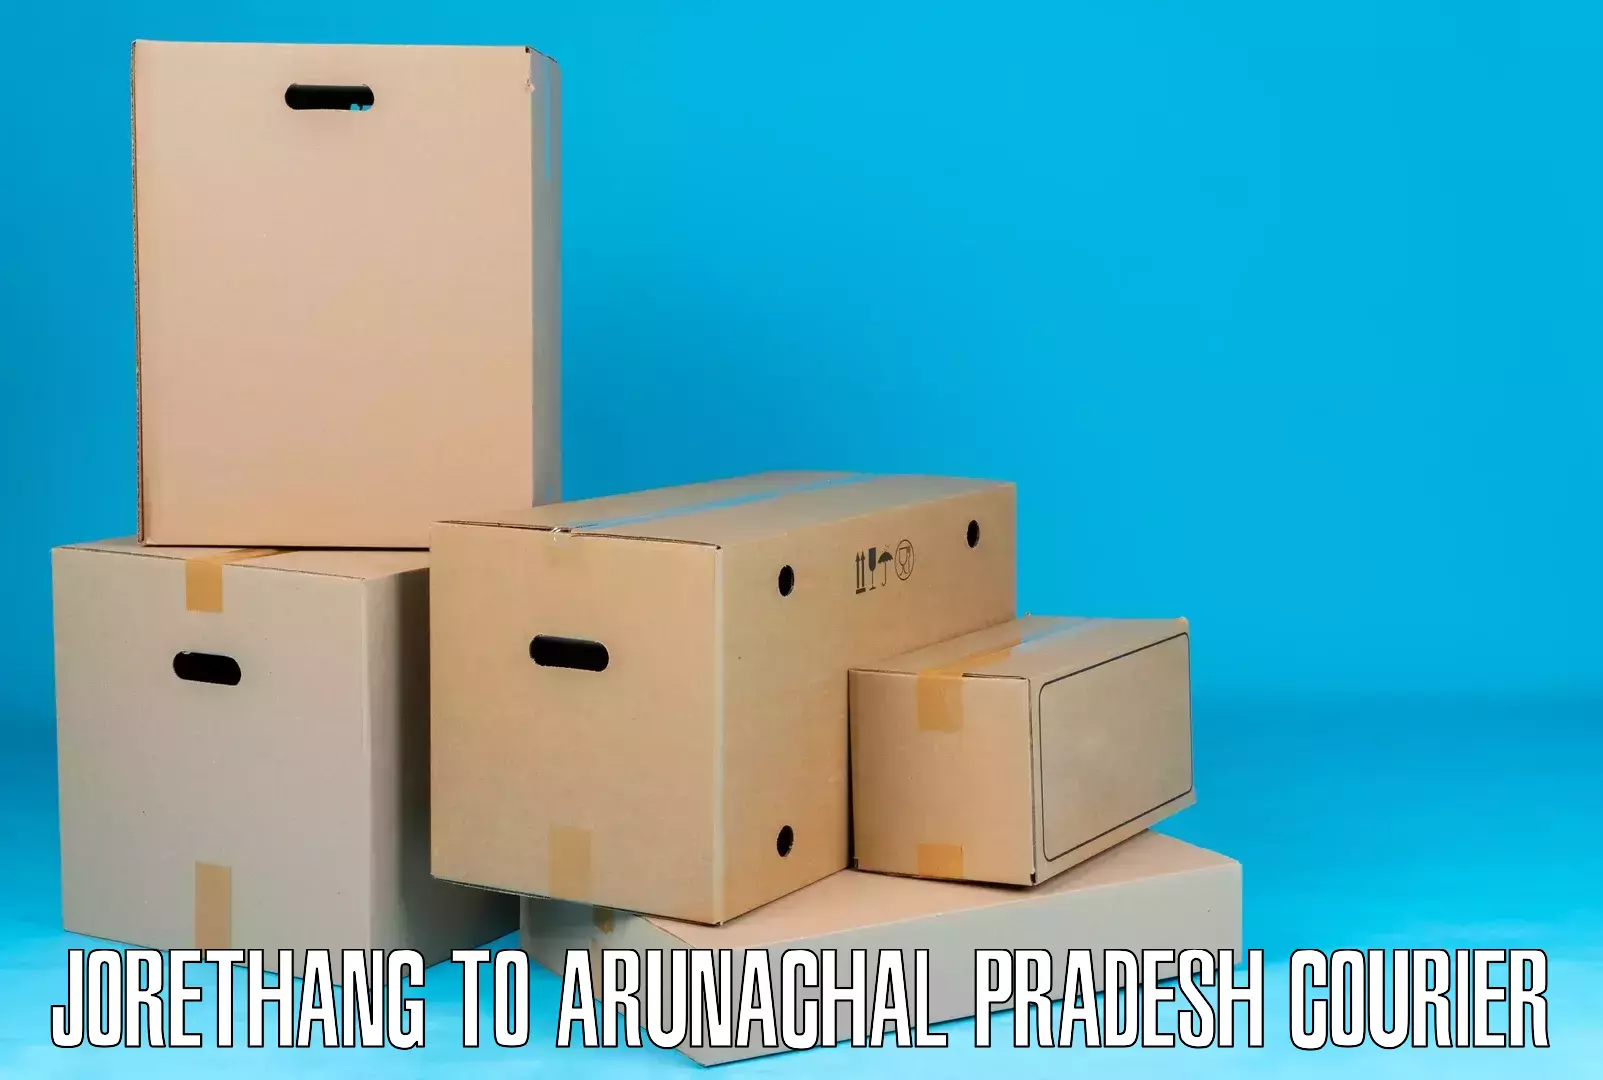 Large package courier Jorethang to Kharsang